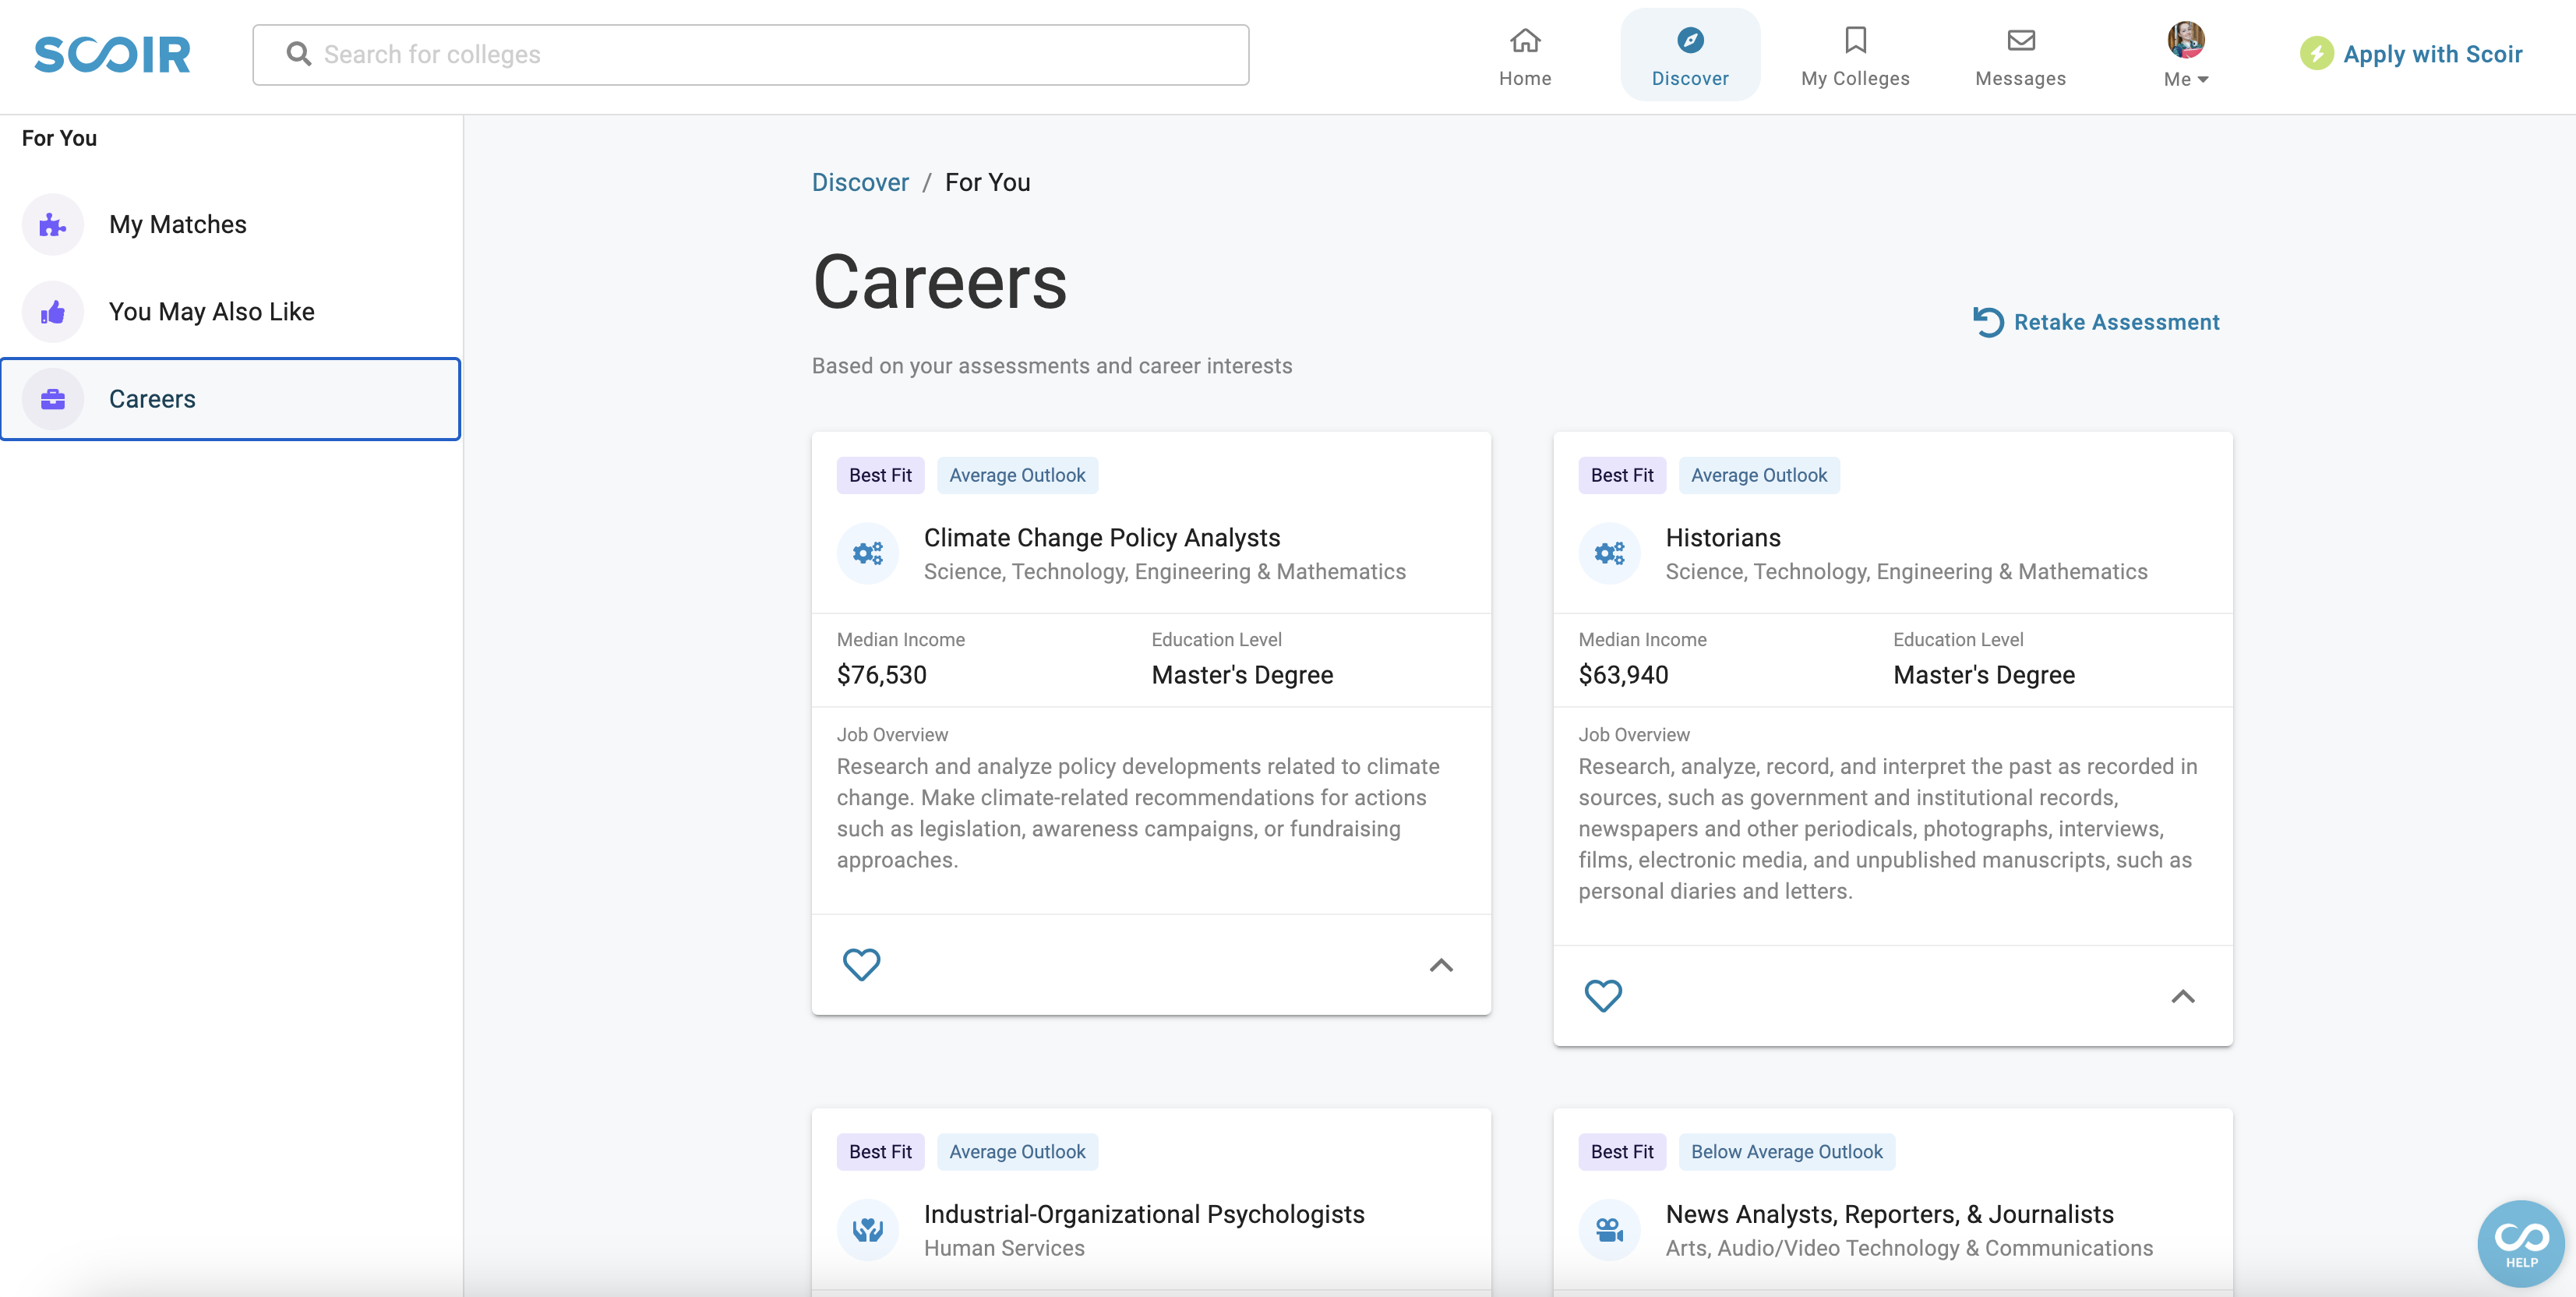 Career Page